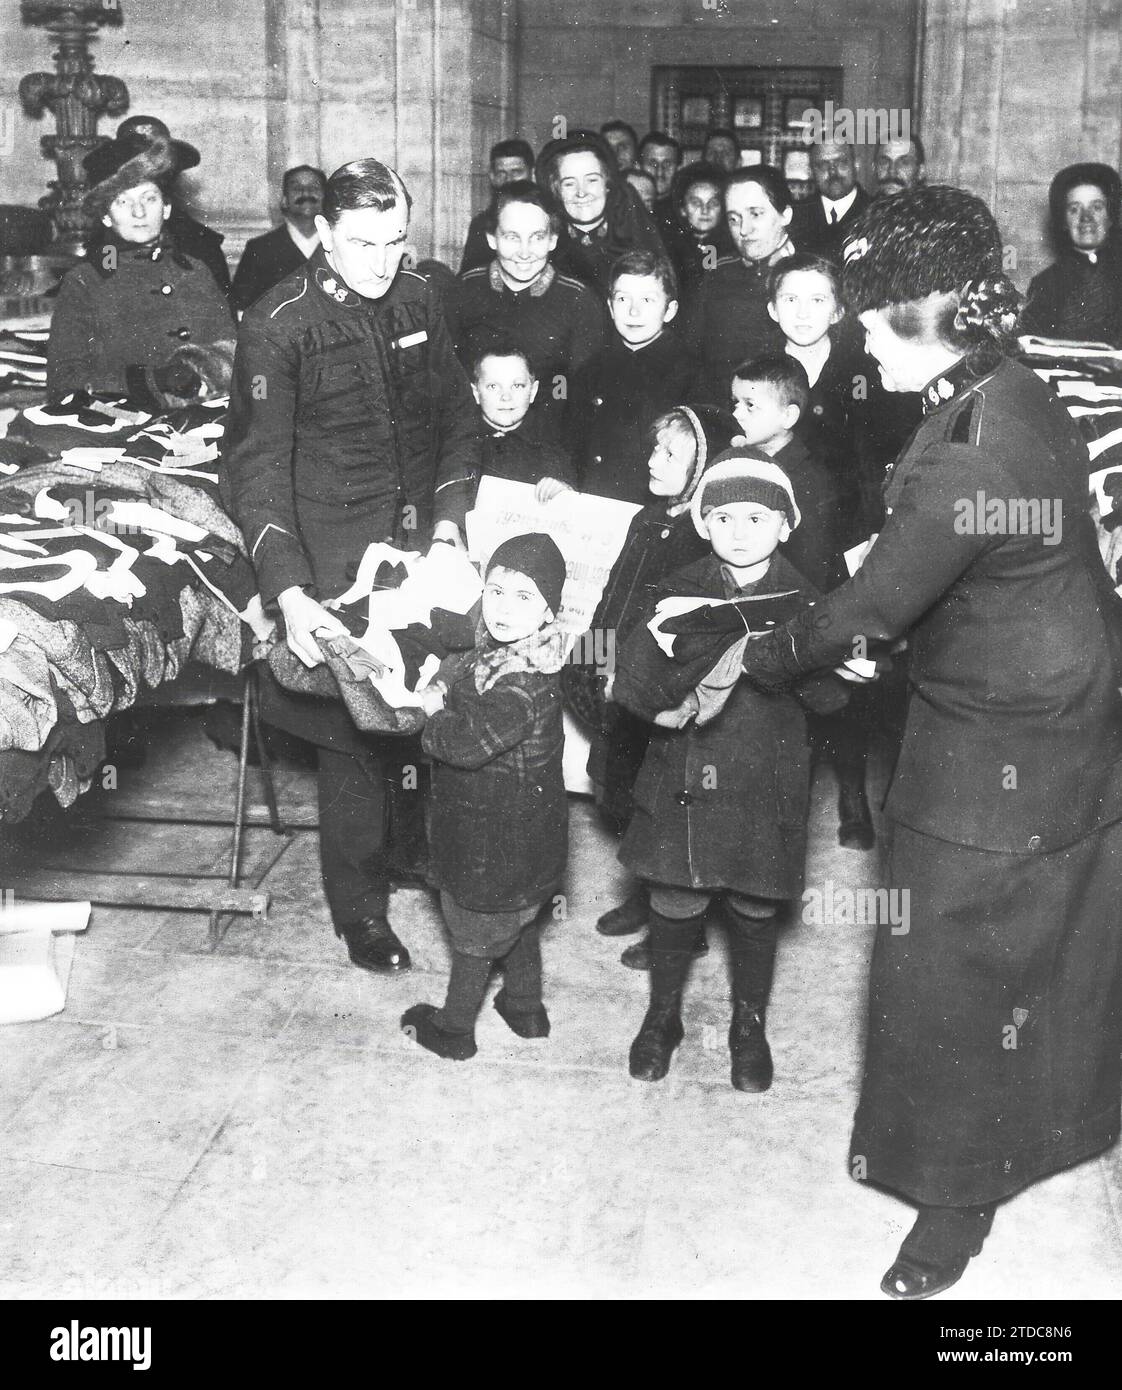 01/31/1921. Berlin. For Poor Children. Distribution of Clothes to 800 Children by Representatives of the Salvation Army of the United States. Photo: Phototeck -. Credit: Album / Archivo ABC Stock Photo